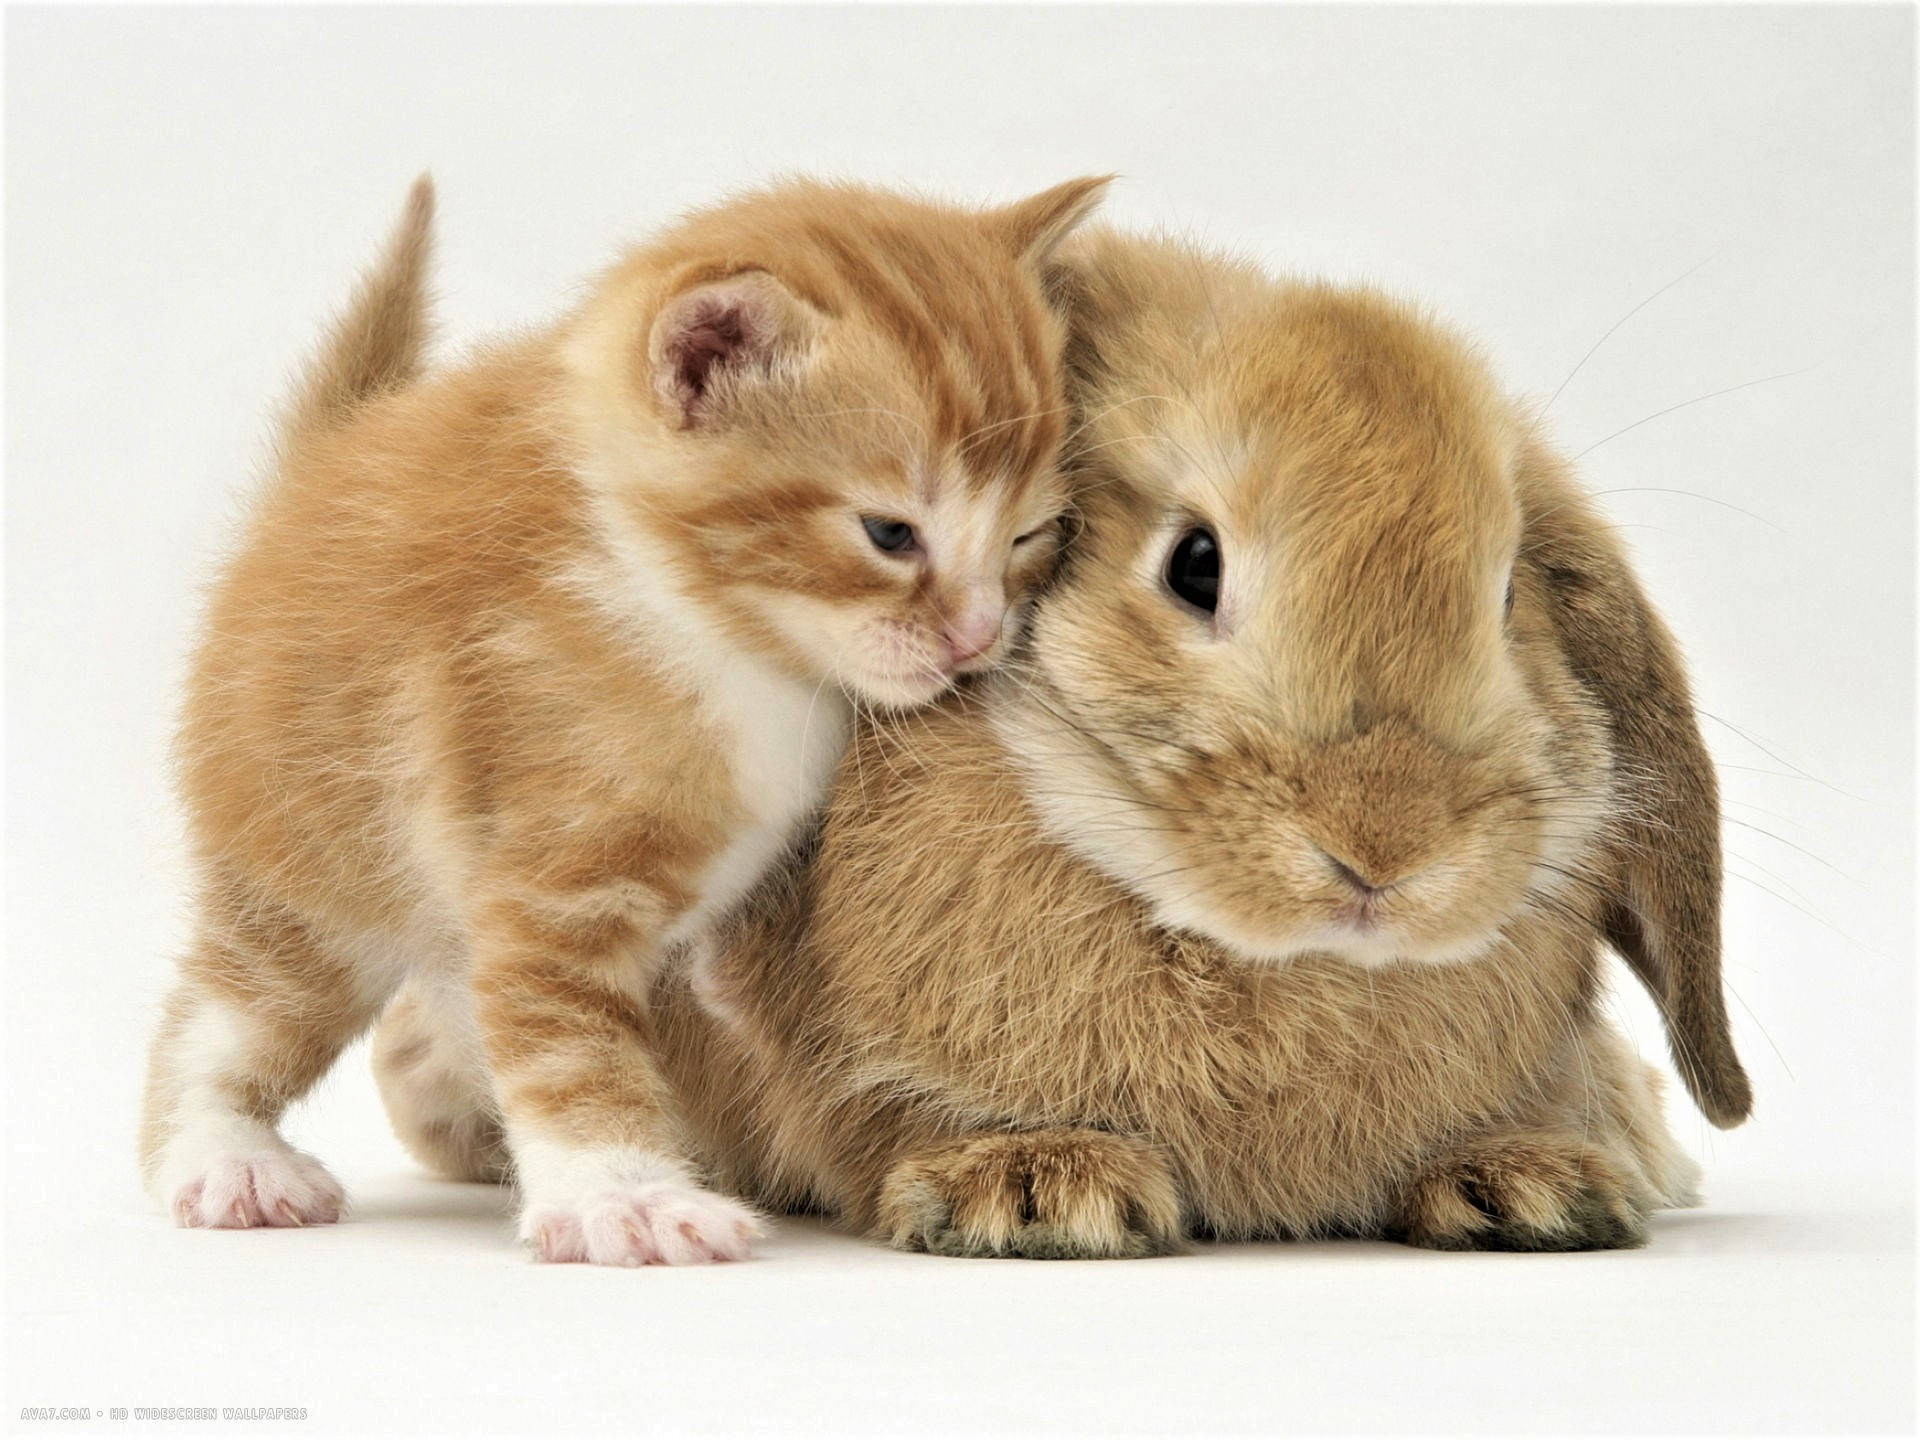 Cute Kitten With Adorable Bunny Background